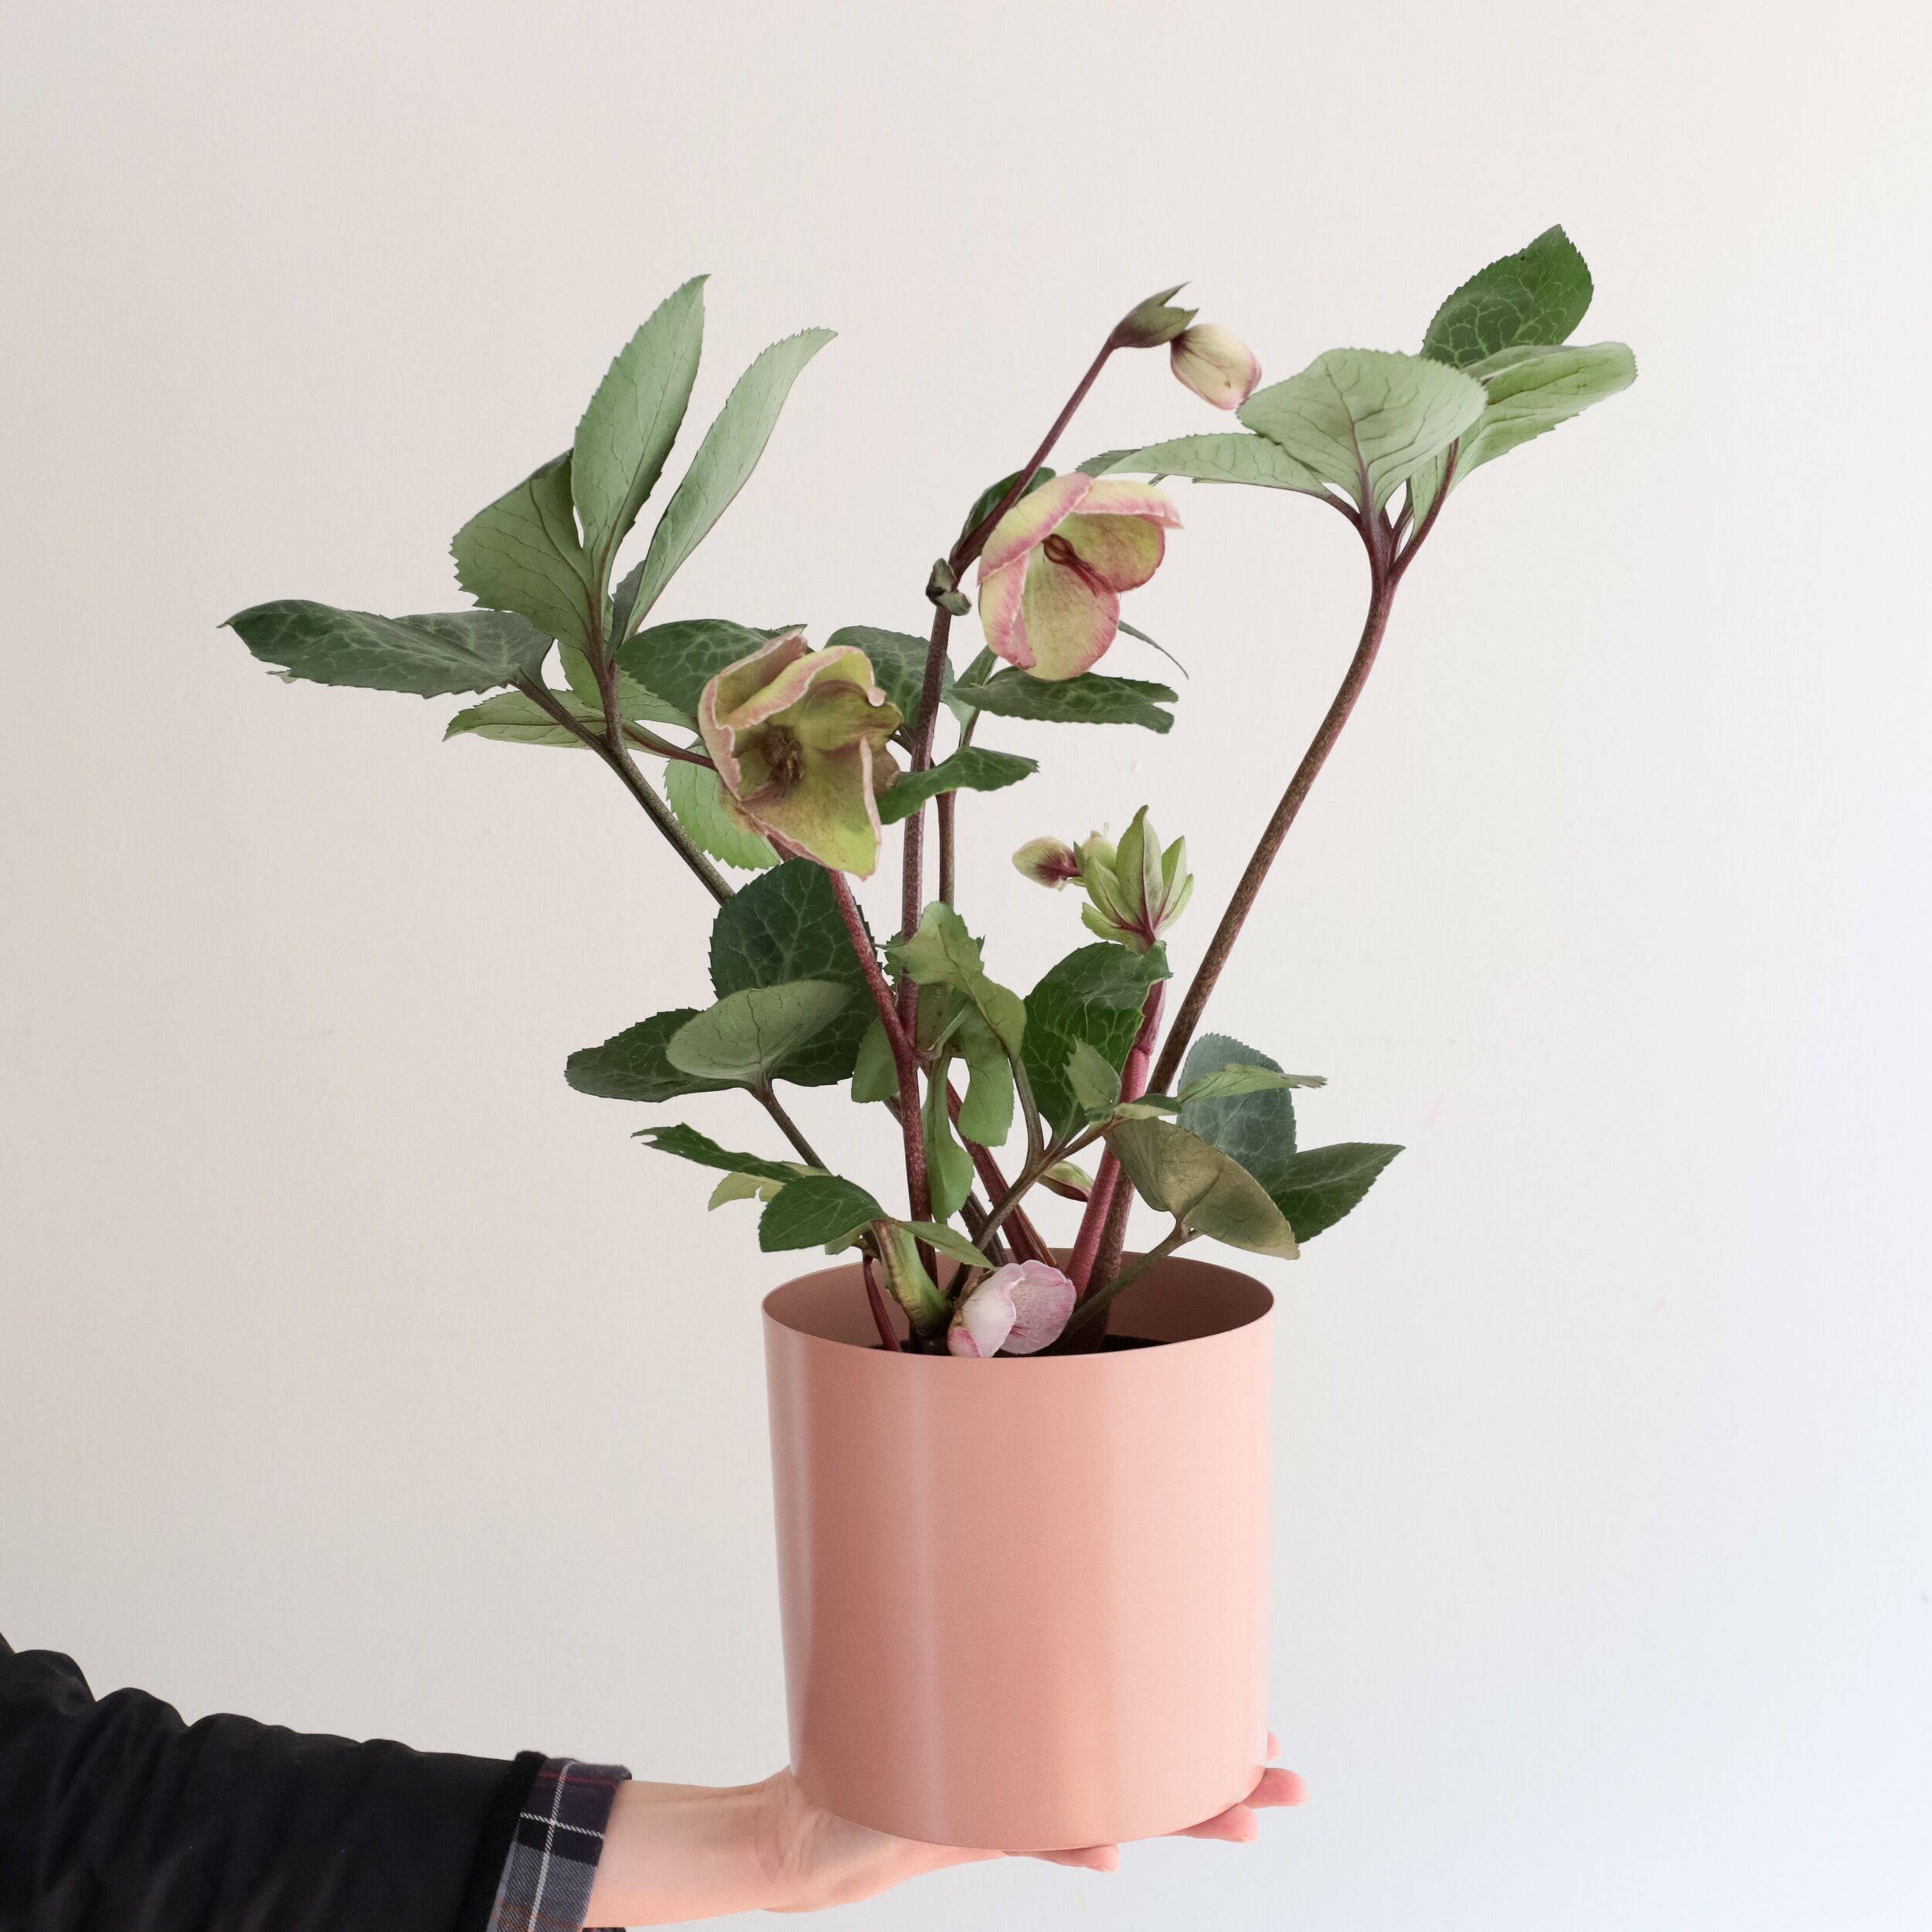 A hellebore plant in a peach colored pot being held up by a hand in front of a white background